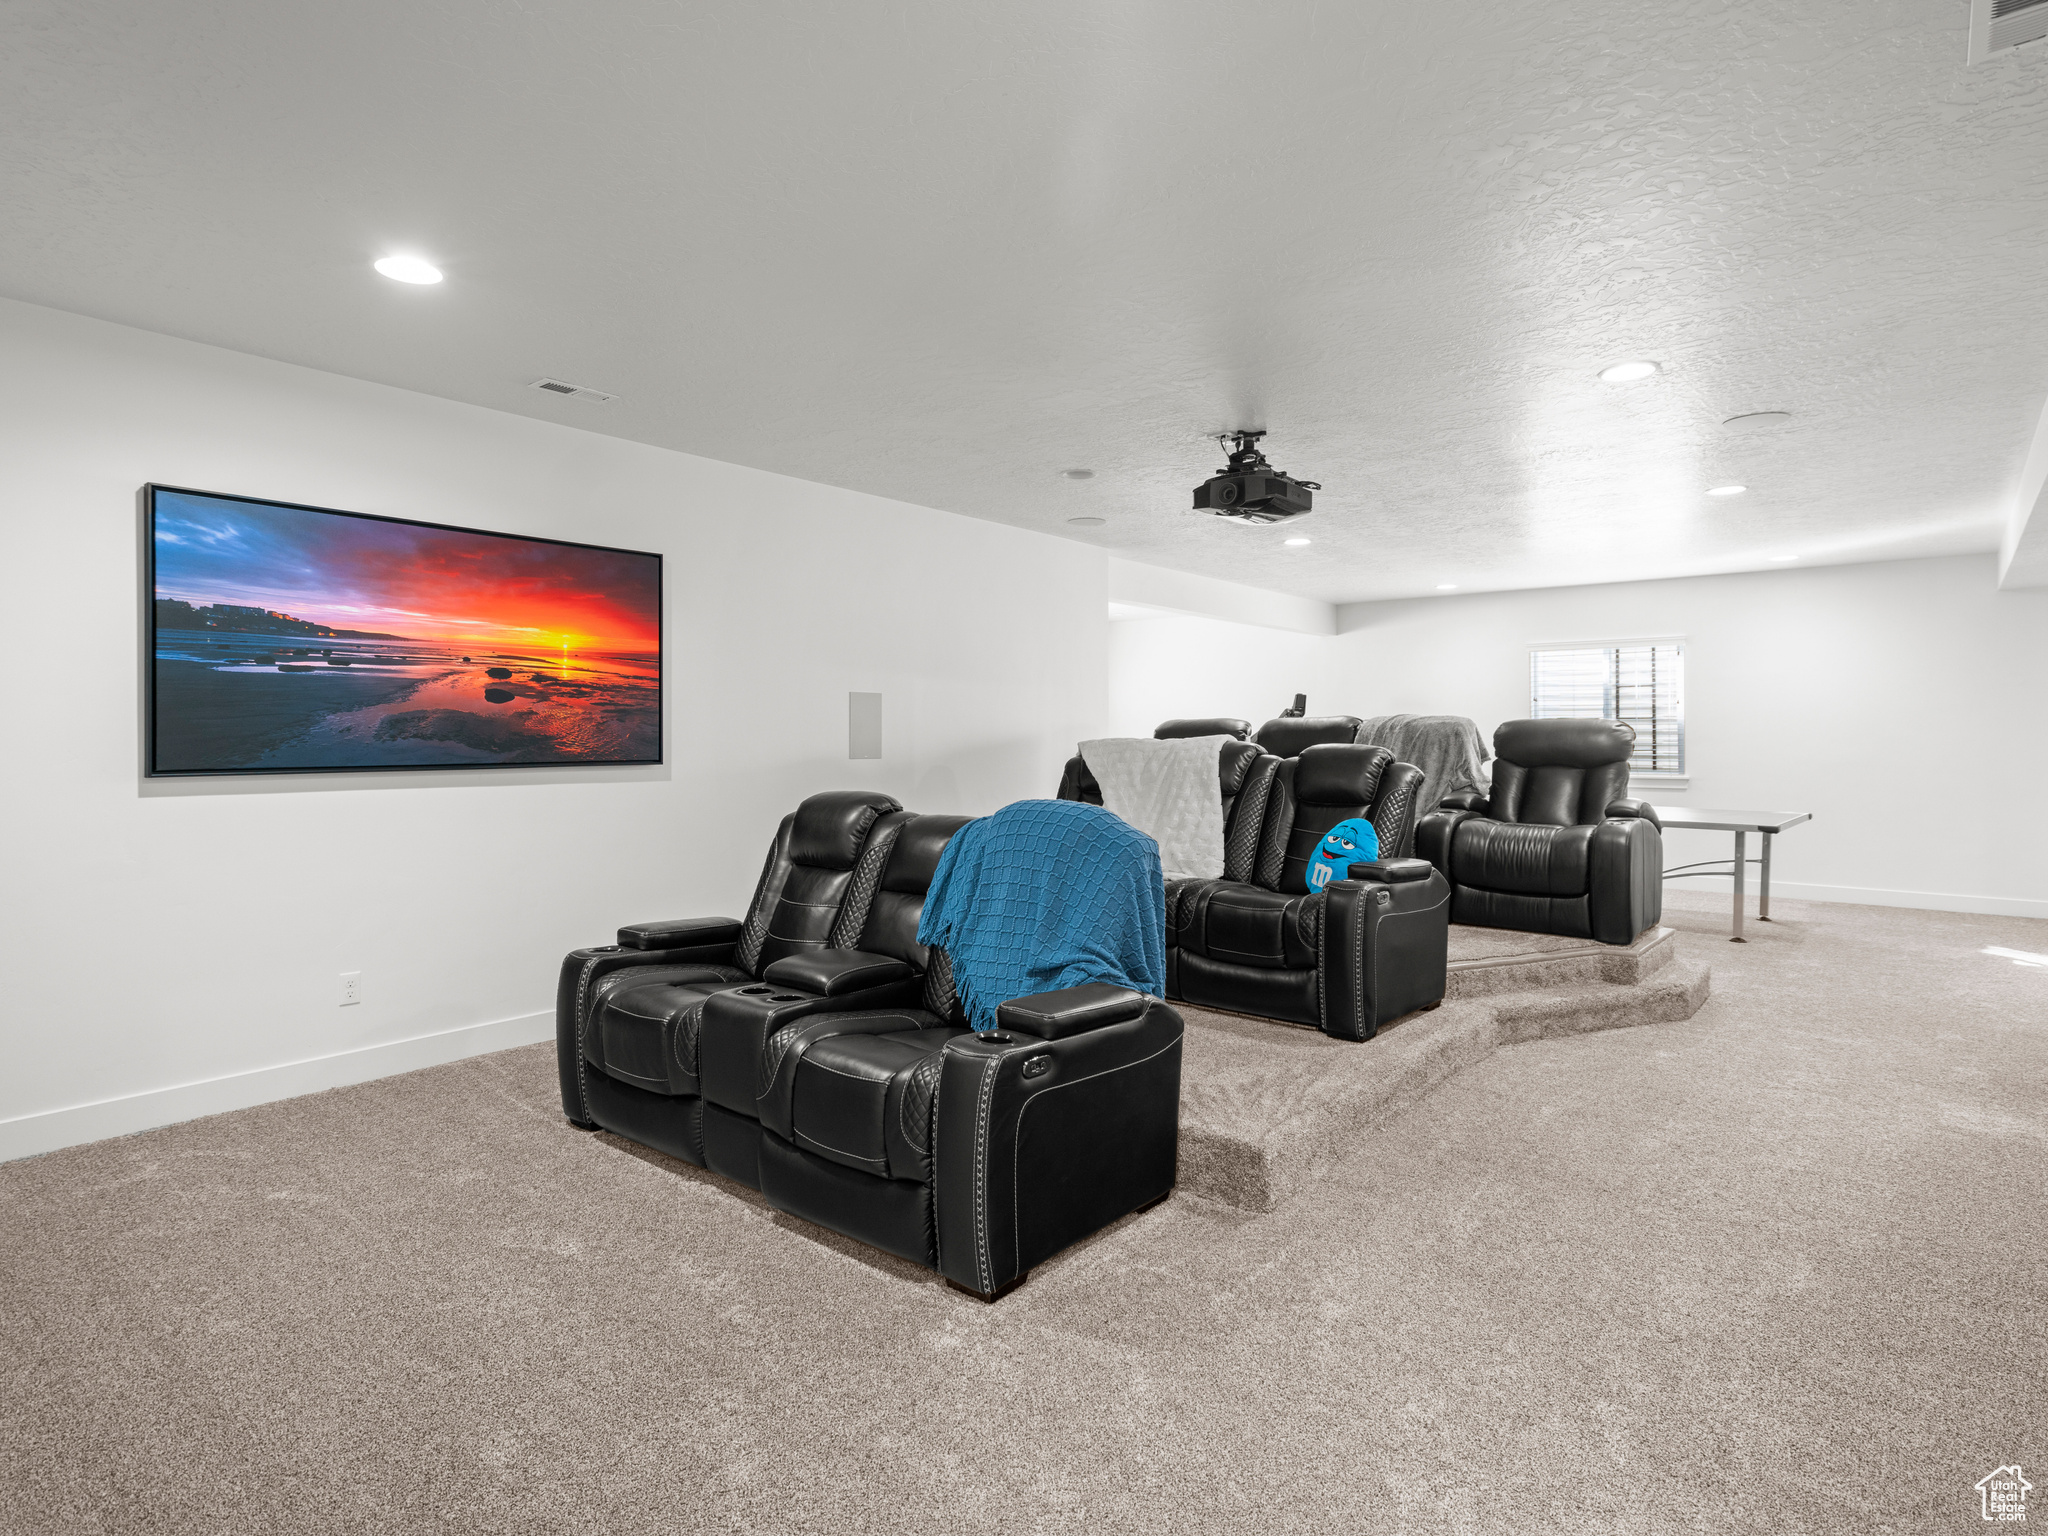 Cinema room with carpet floors and a textured ceiling